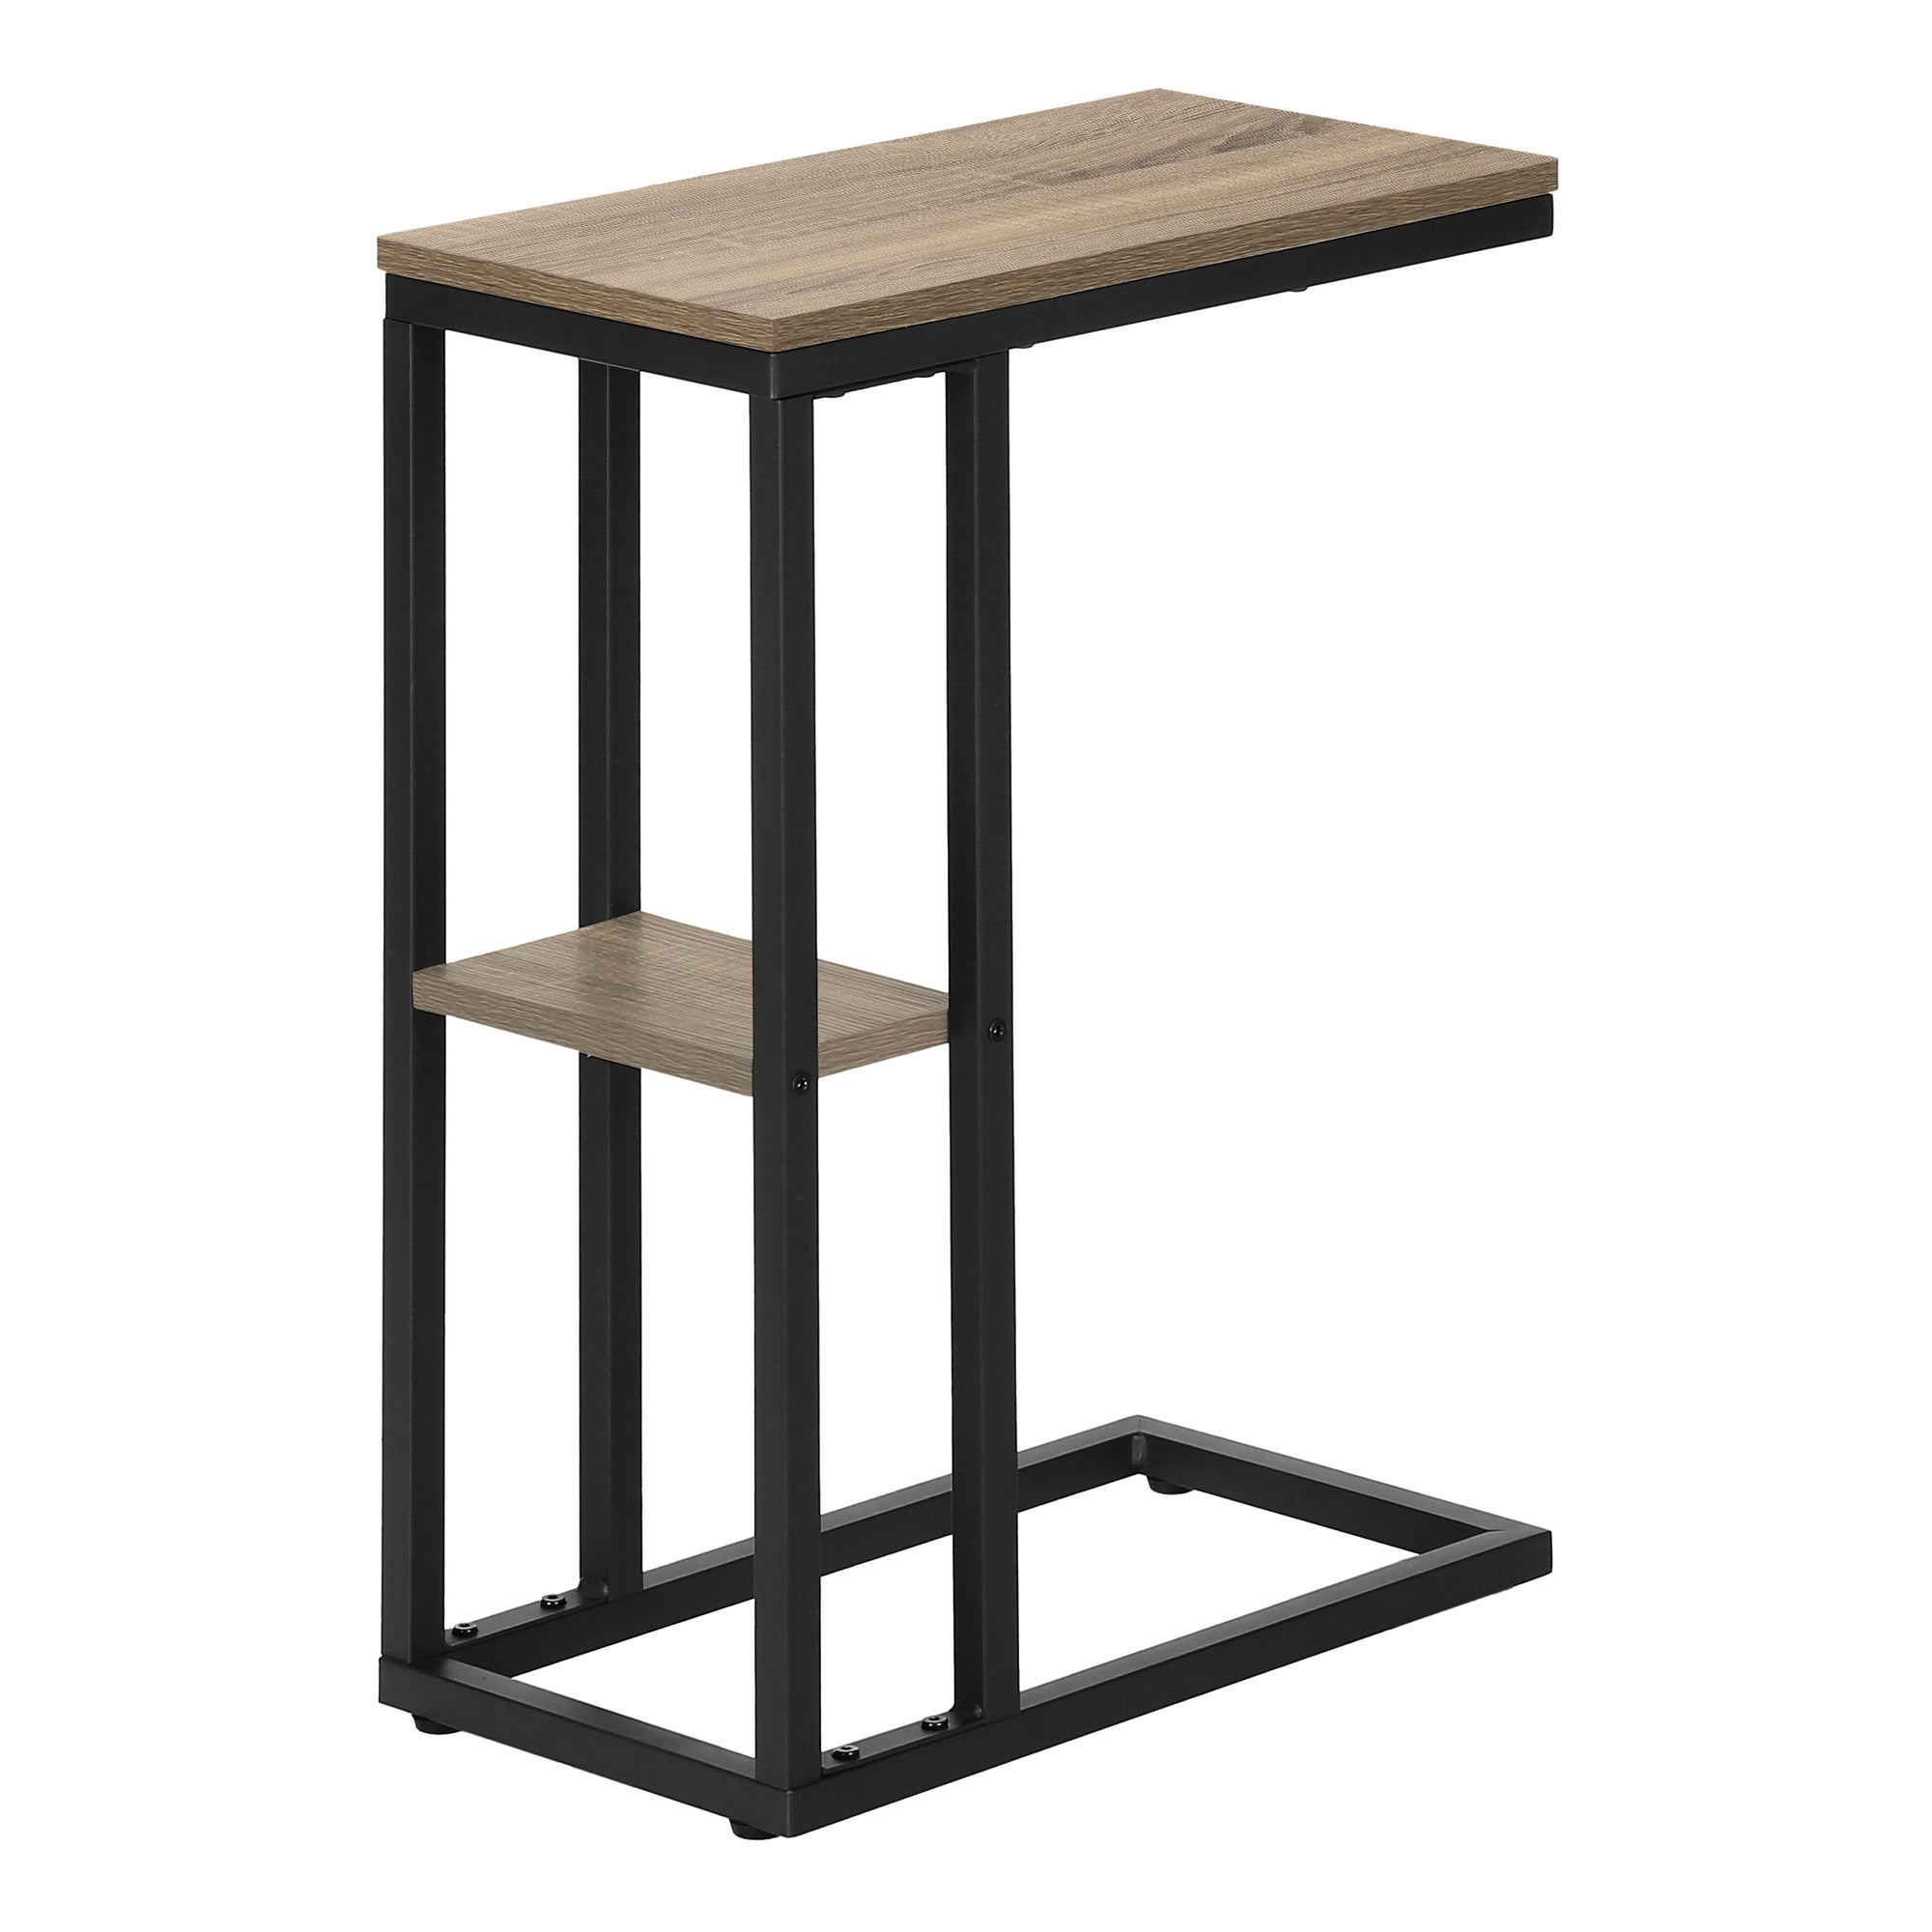 MN-183672    Accent Table, C-Shaped, End, Side, Snack, Living Room, Bedroom, Metal Legs, Laminate, Dark Taupe, Black, Contemporary, Modern